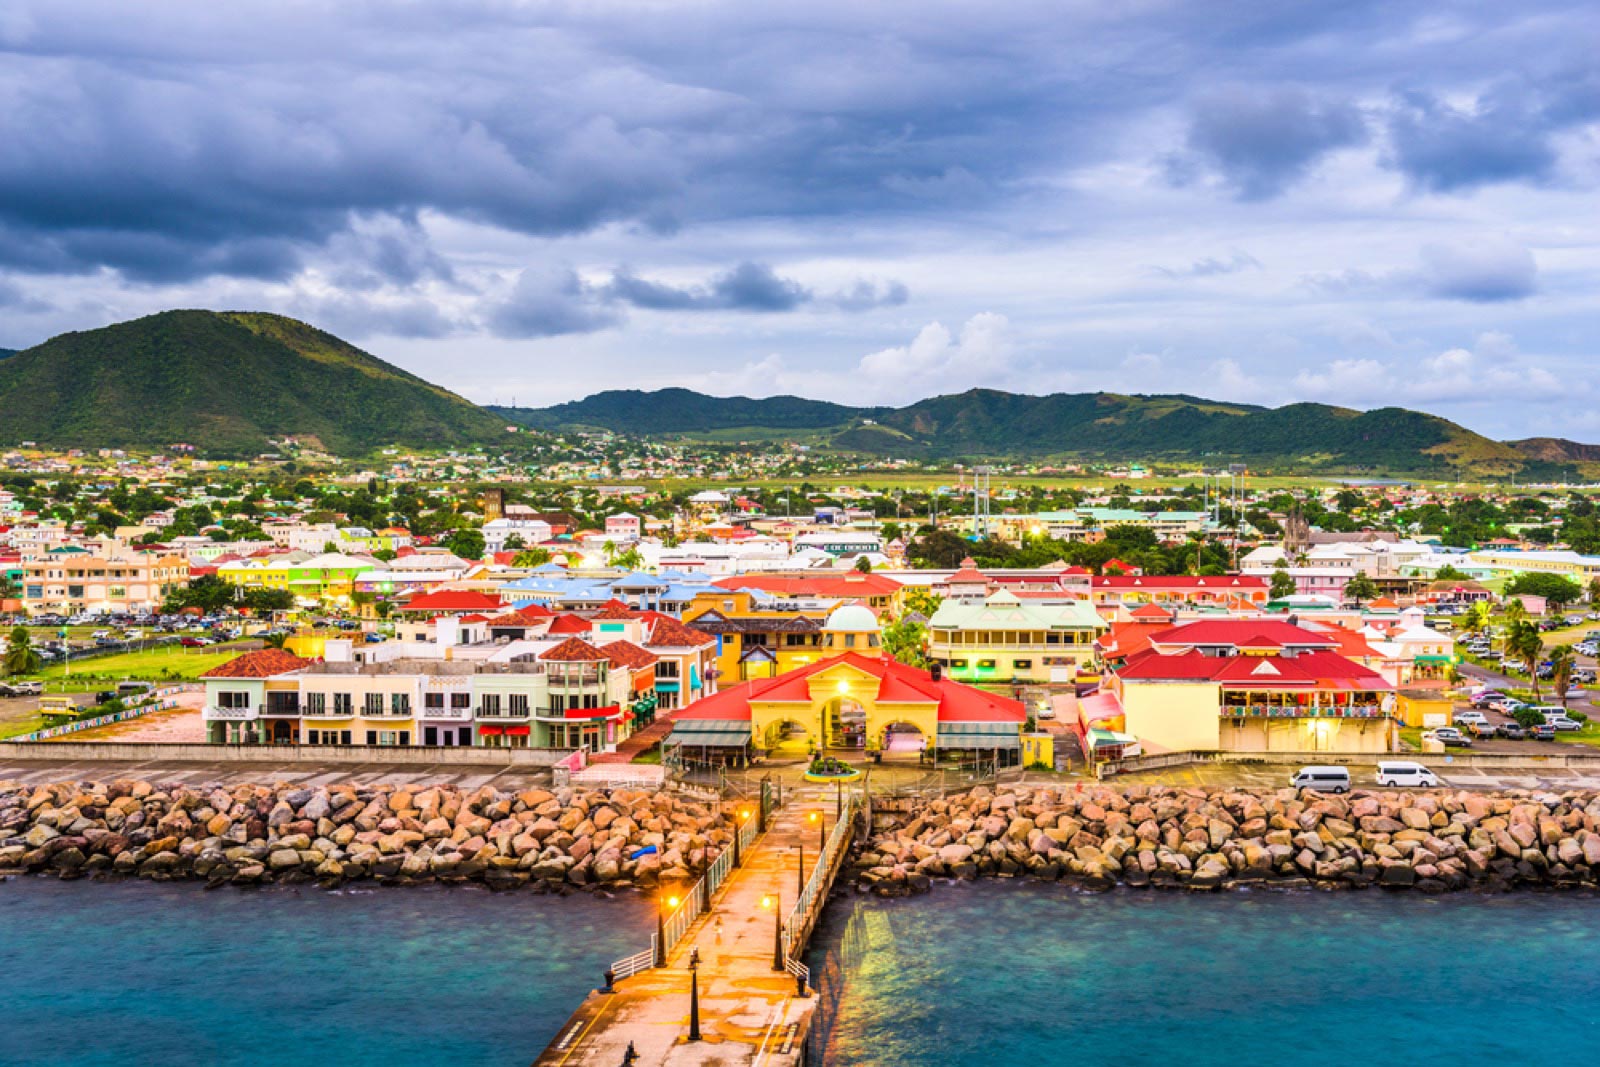 🗺 Most People Can’t Locate 18/25 of These Countries on a Map – Can You? Saint Kitts and Nevis